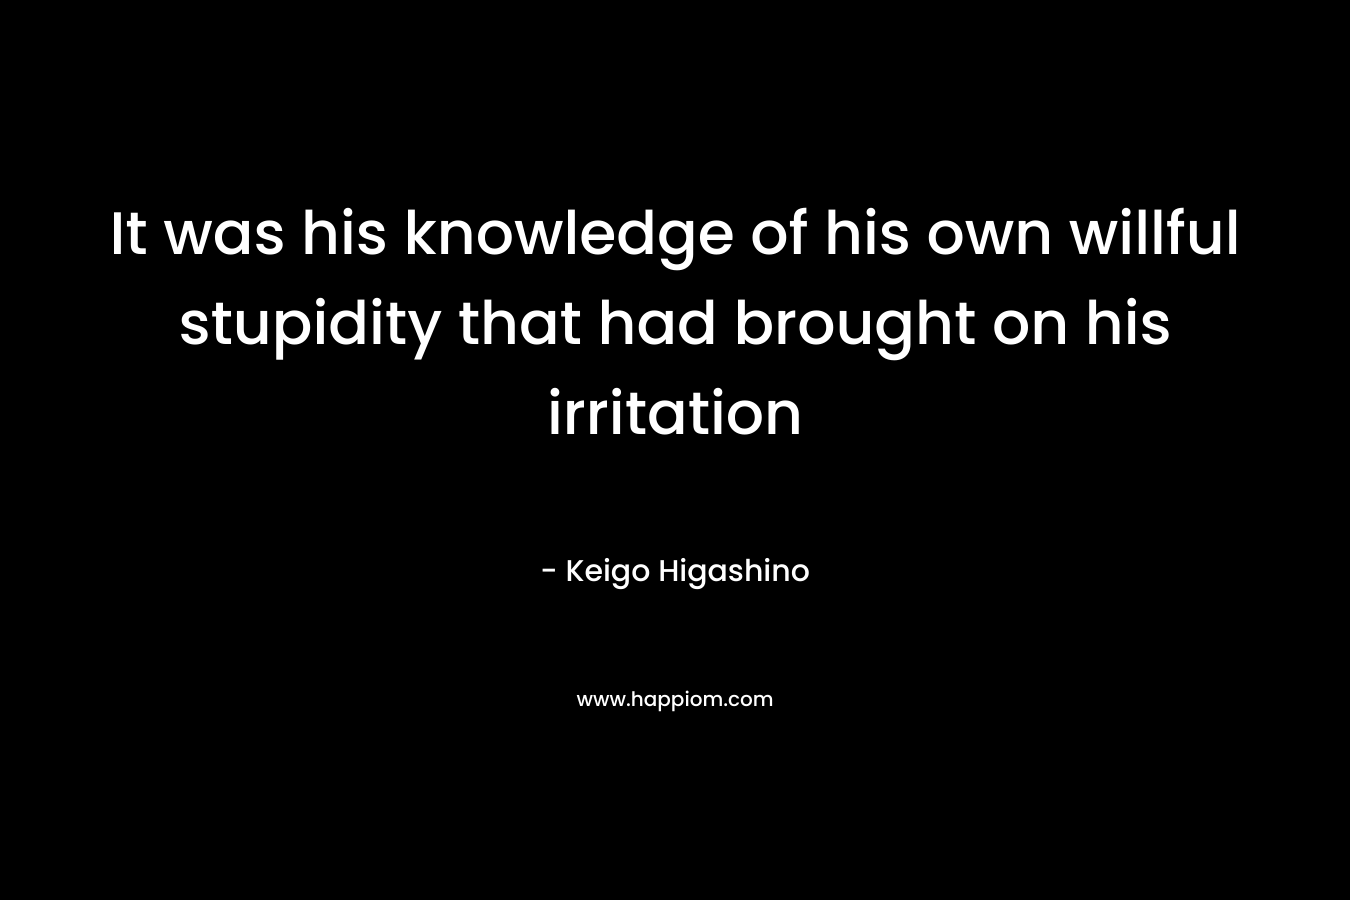 It was his knowledge of his own willful stupidity that had brought on his irritation